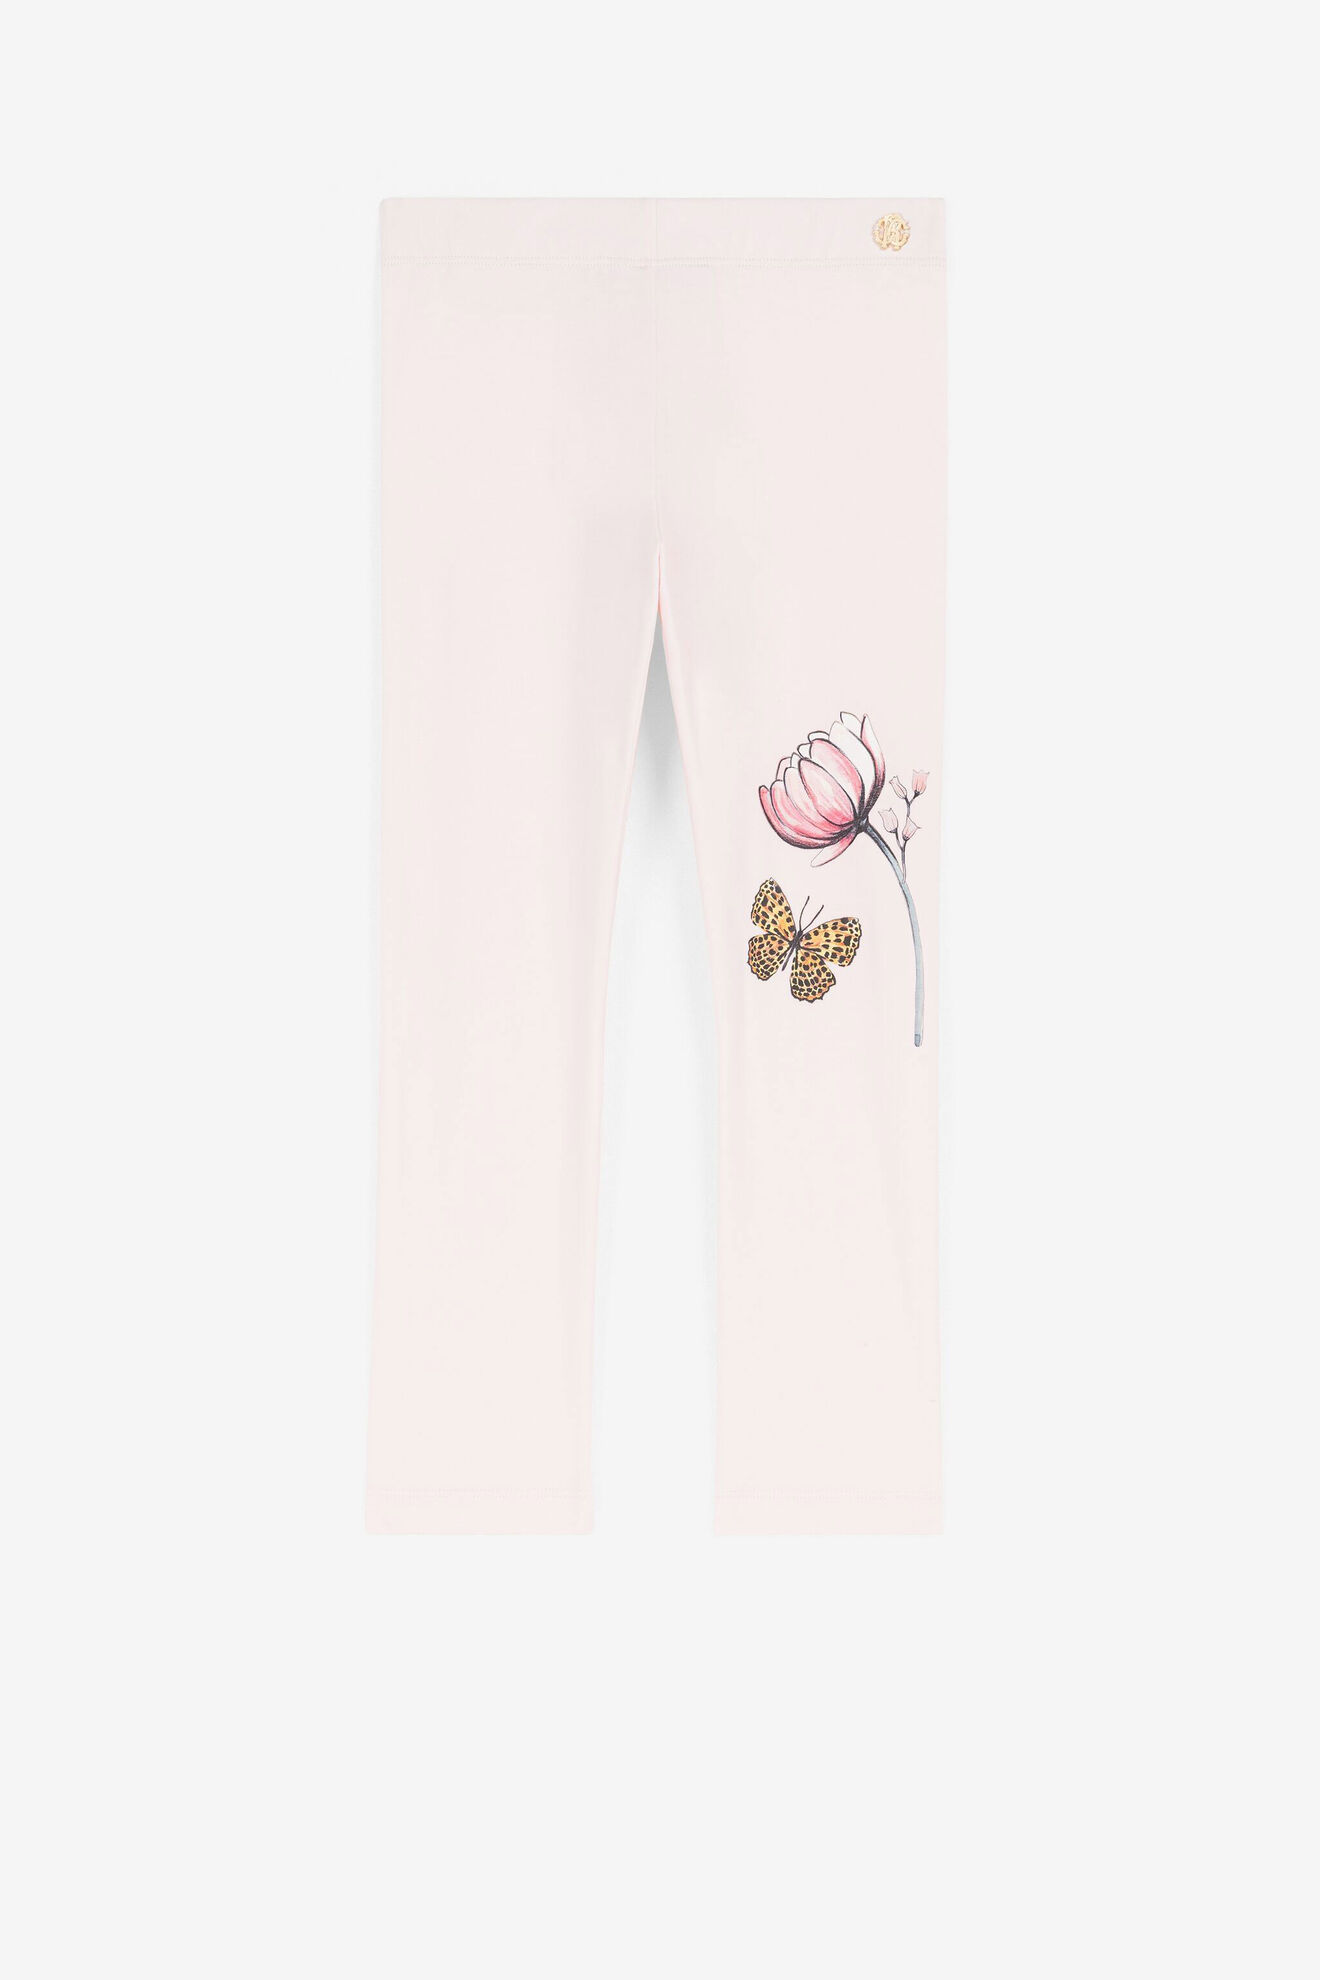 Butterfly And Flower-Print Leggings, BABY PINK, Last chance